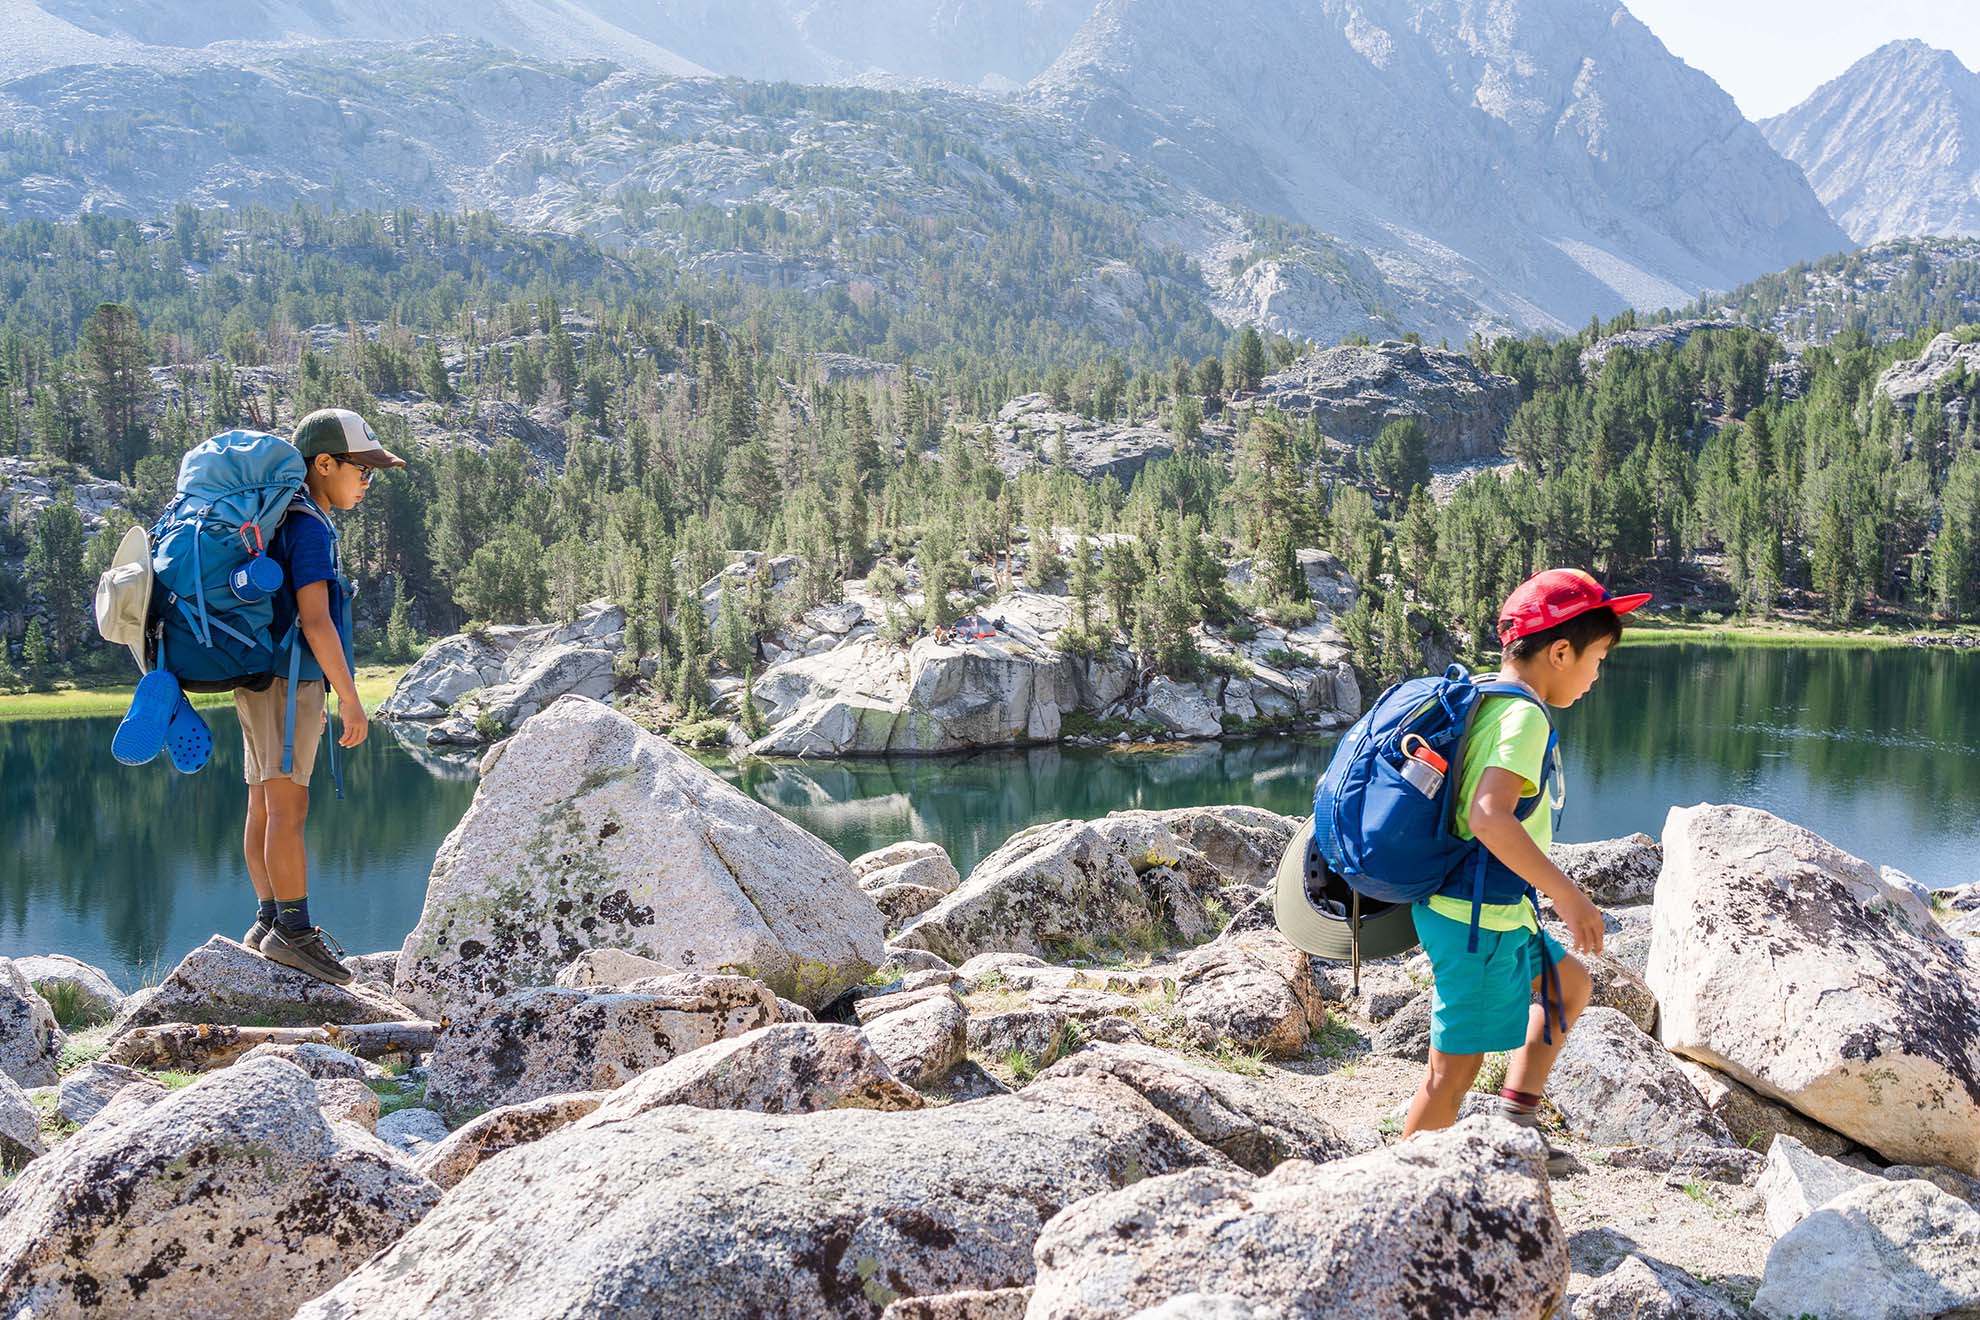 Two boys backpacking on rocks with lake in background